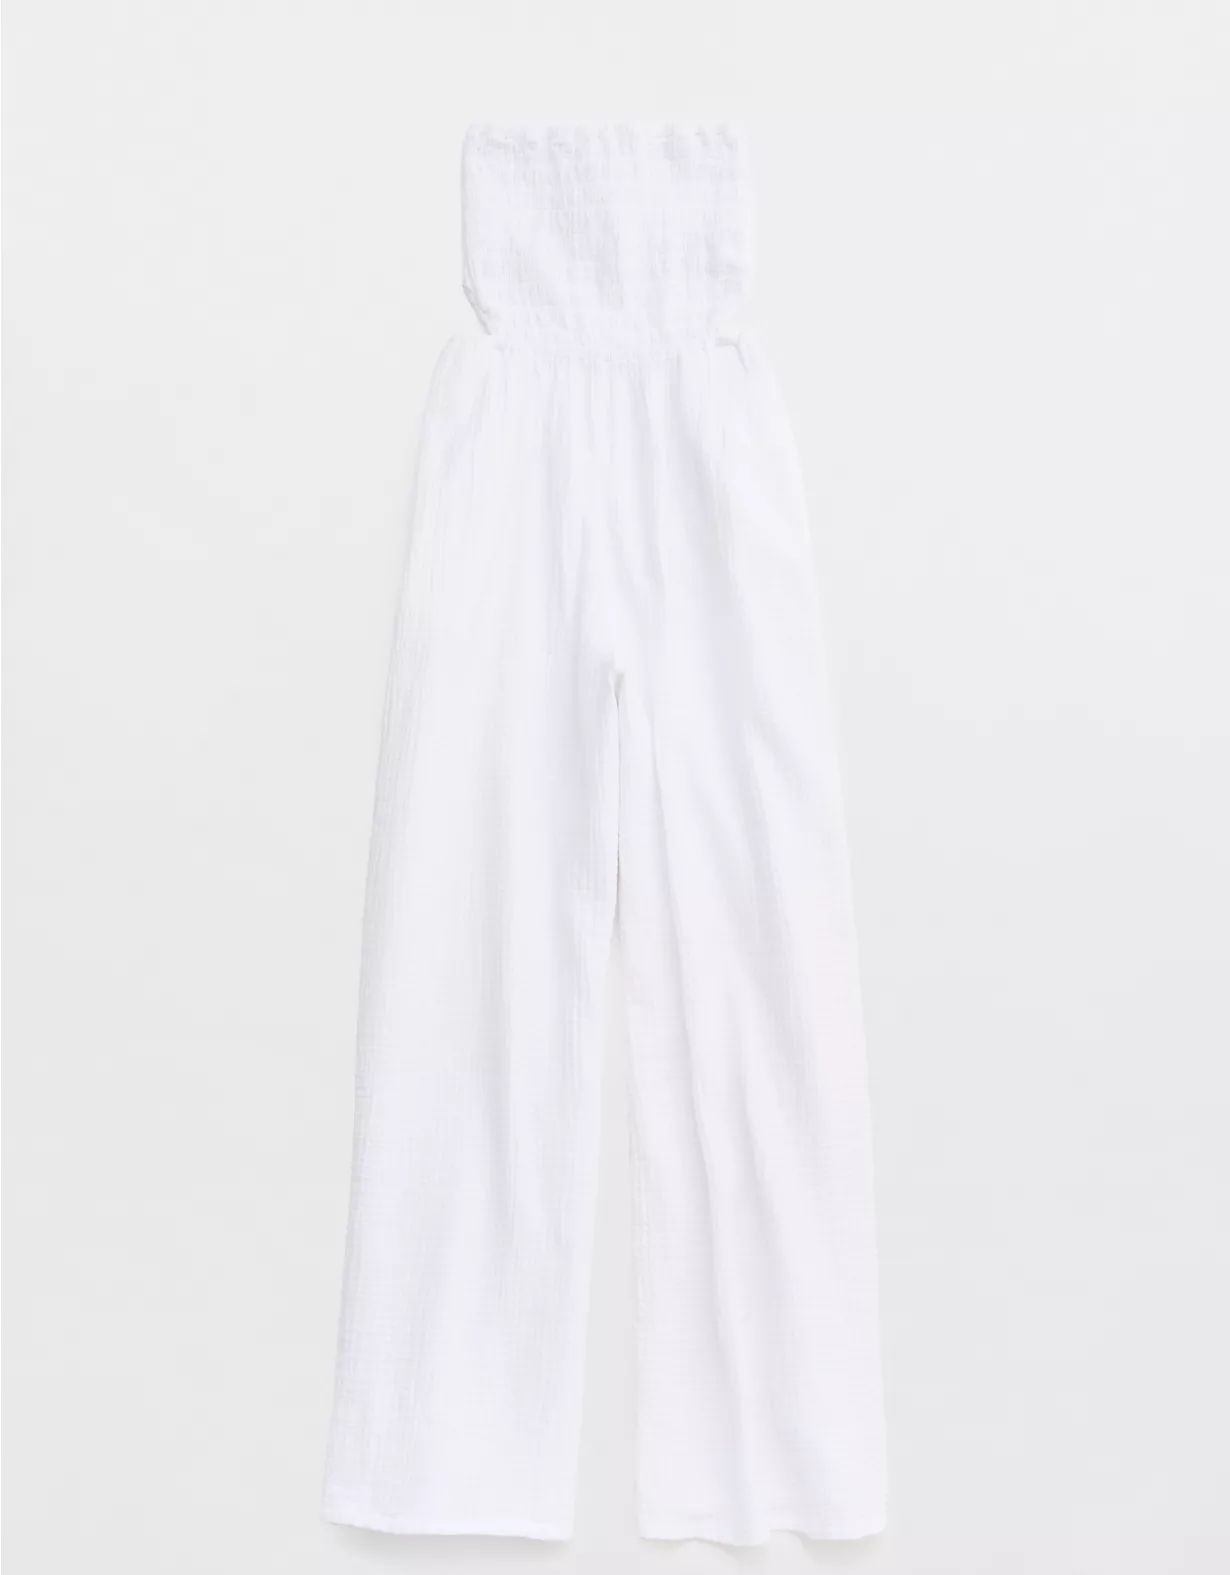 Aerie Pool-To-Party Strapless Jumpsuit | Aerie